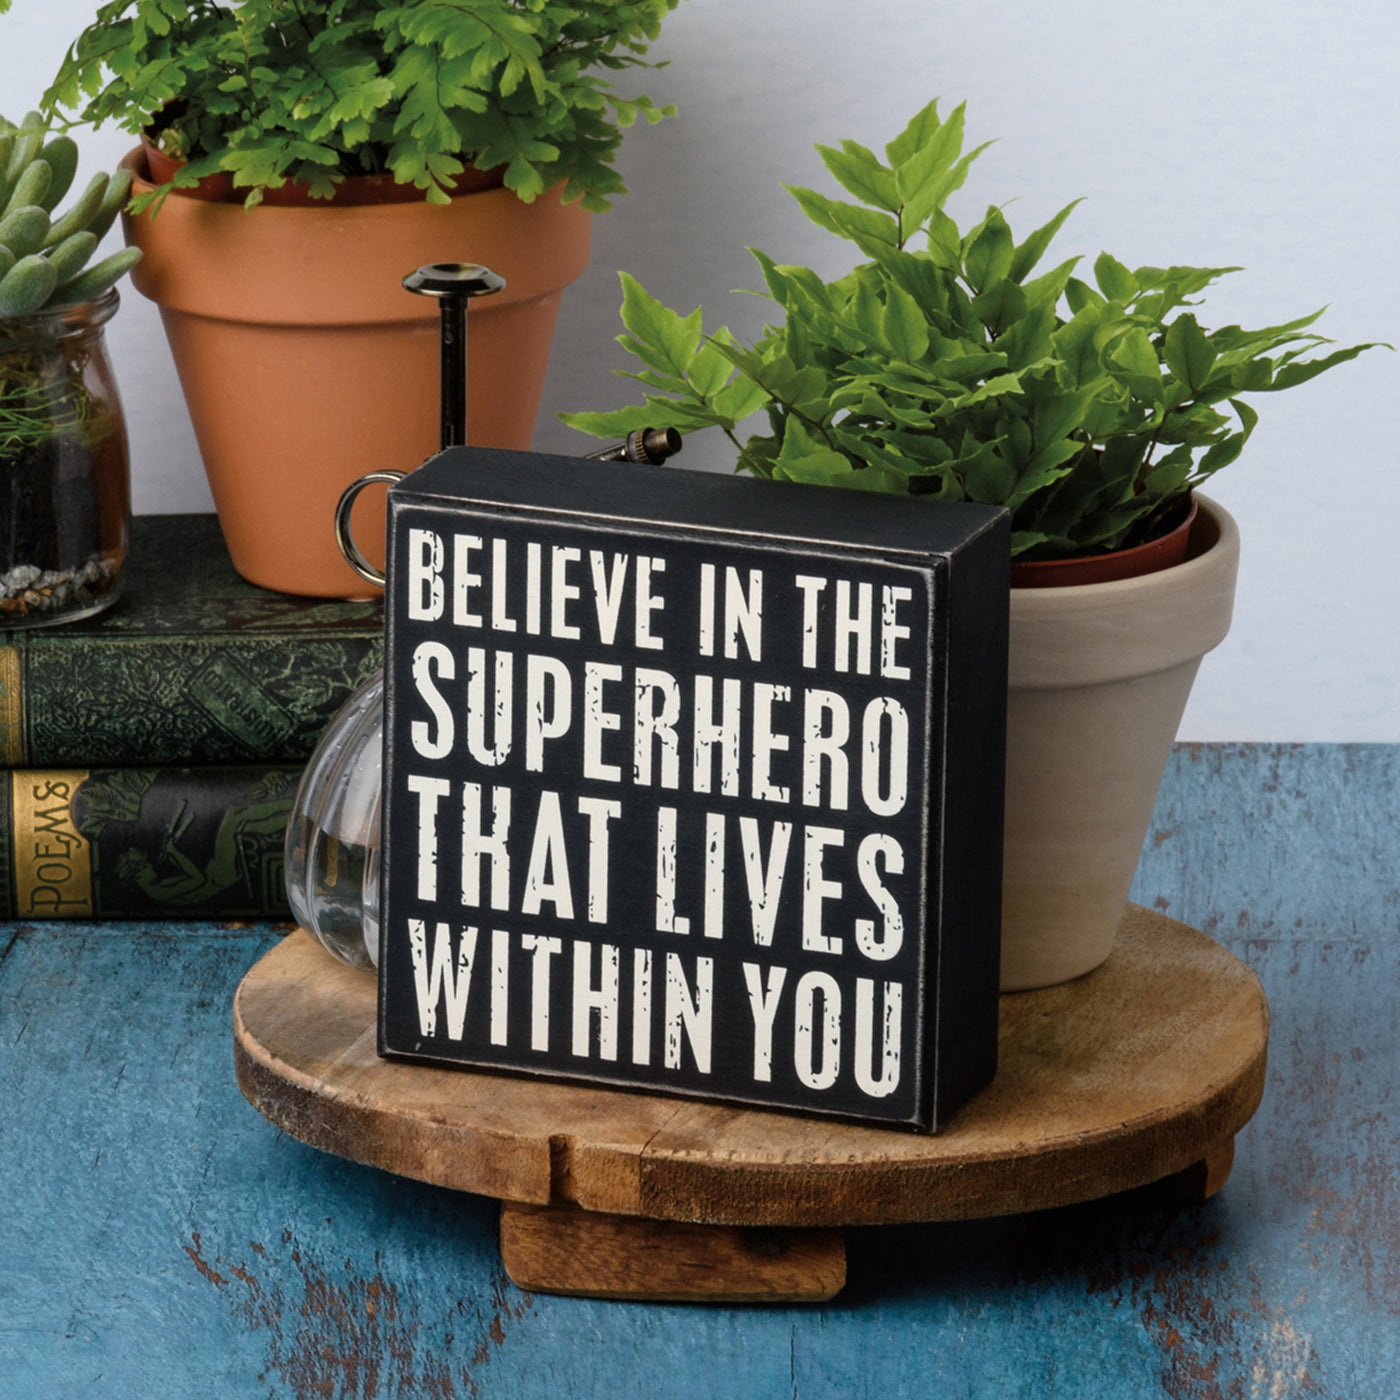 Believe In The Superhero Within You Box Sign